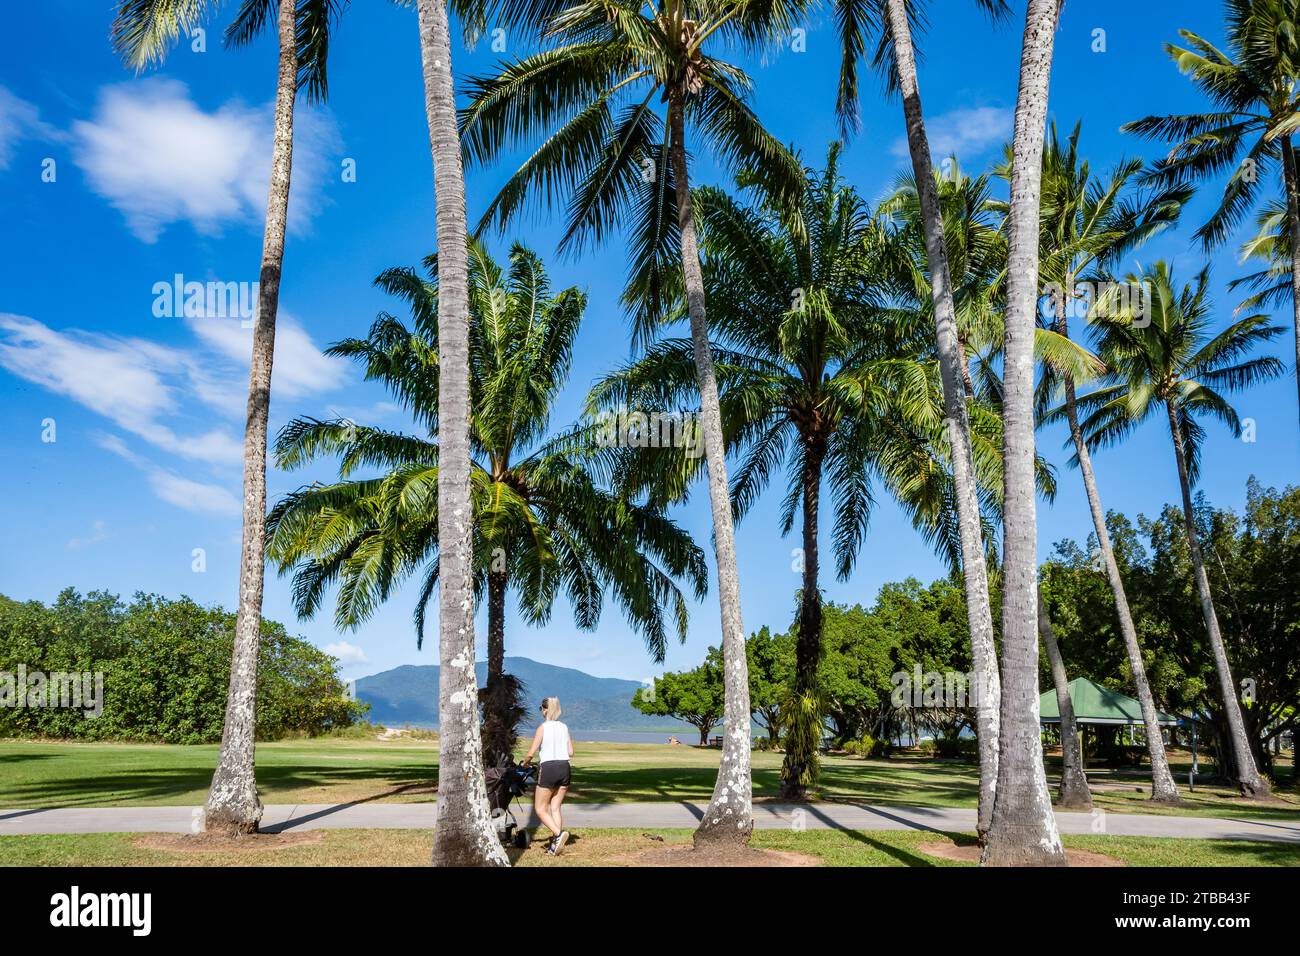 A young woman pushing a stroller under palm trees on the street. Caines, Queensland, Australia. Stock Photo